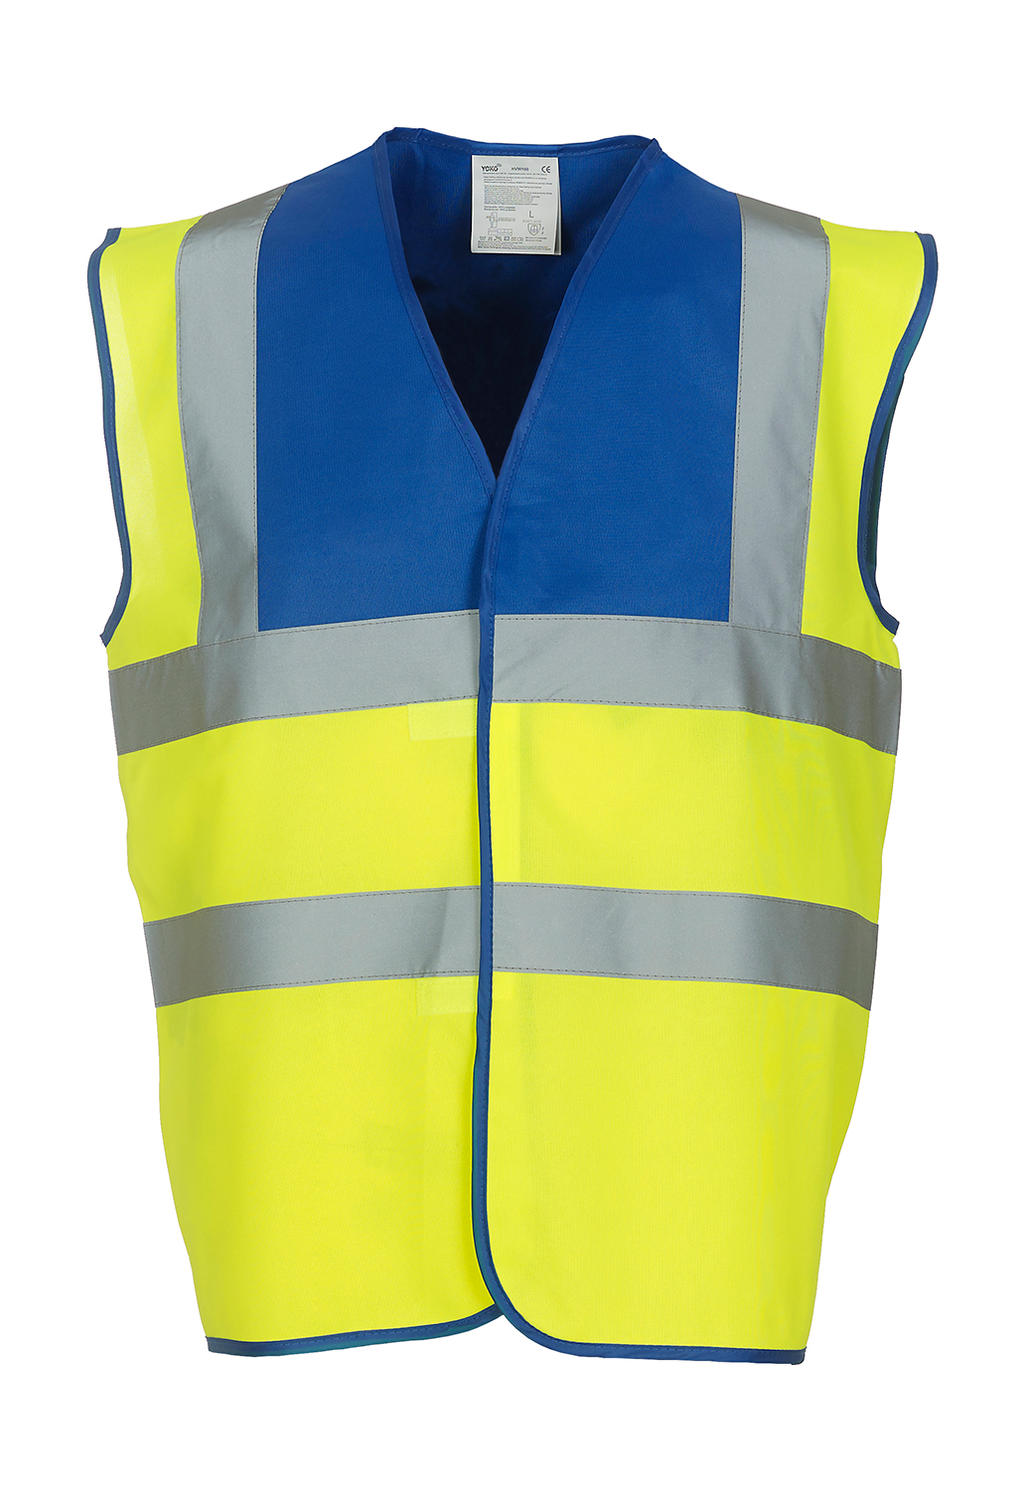  Fluo 2 Band + Brace Waistcoat in Farbe Fluo Yellow/Royal Blue